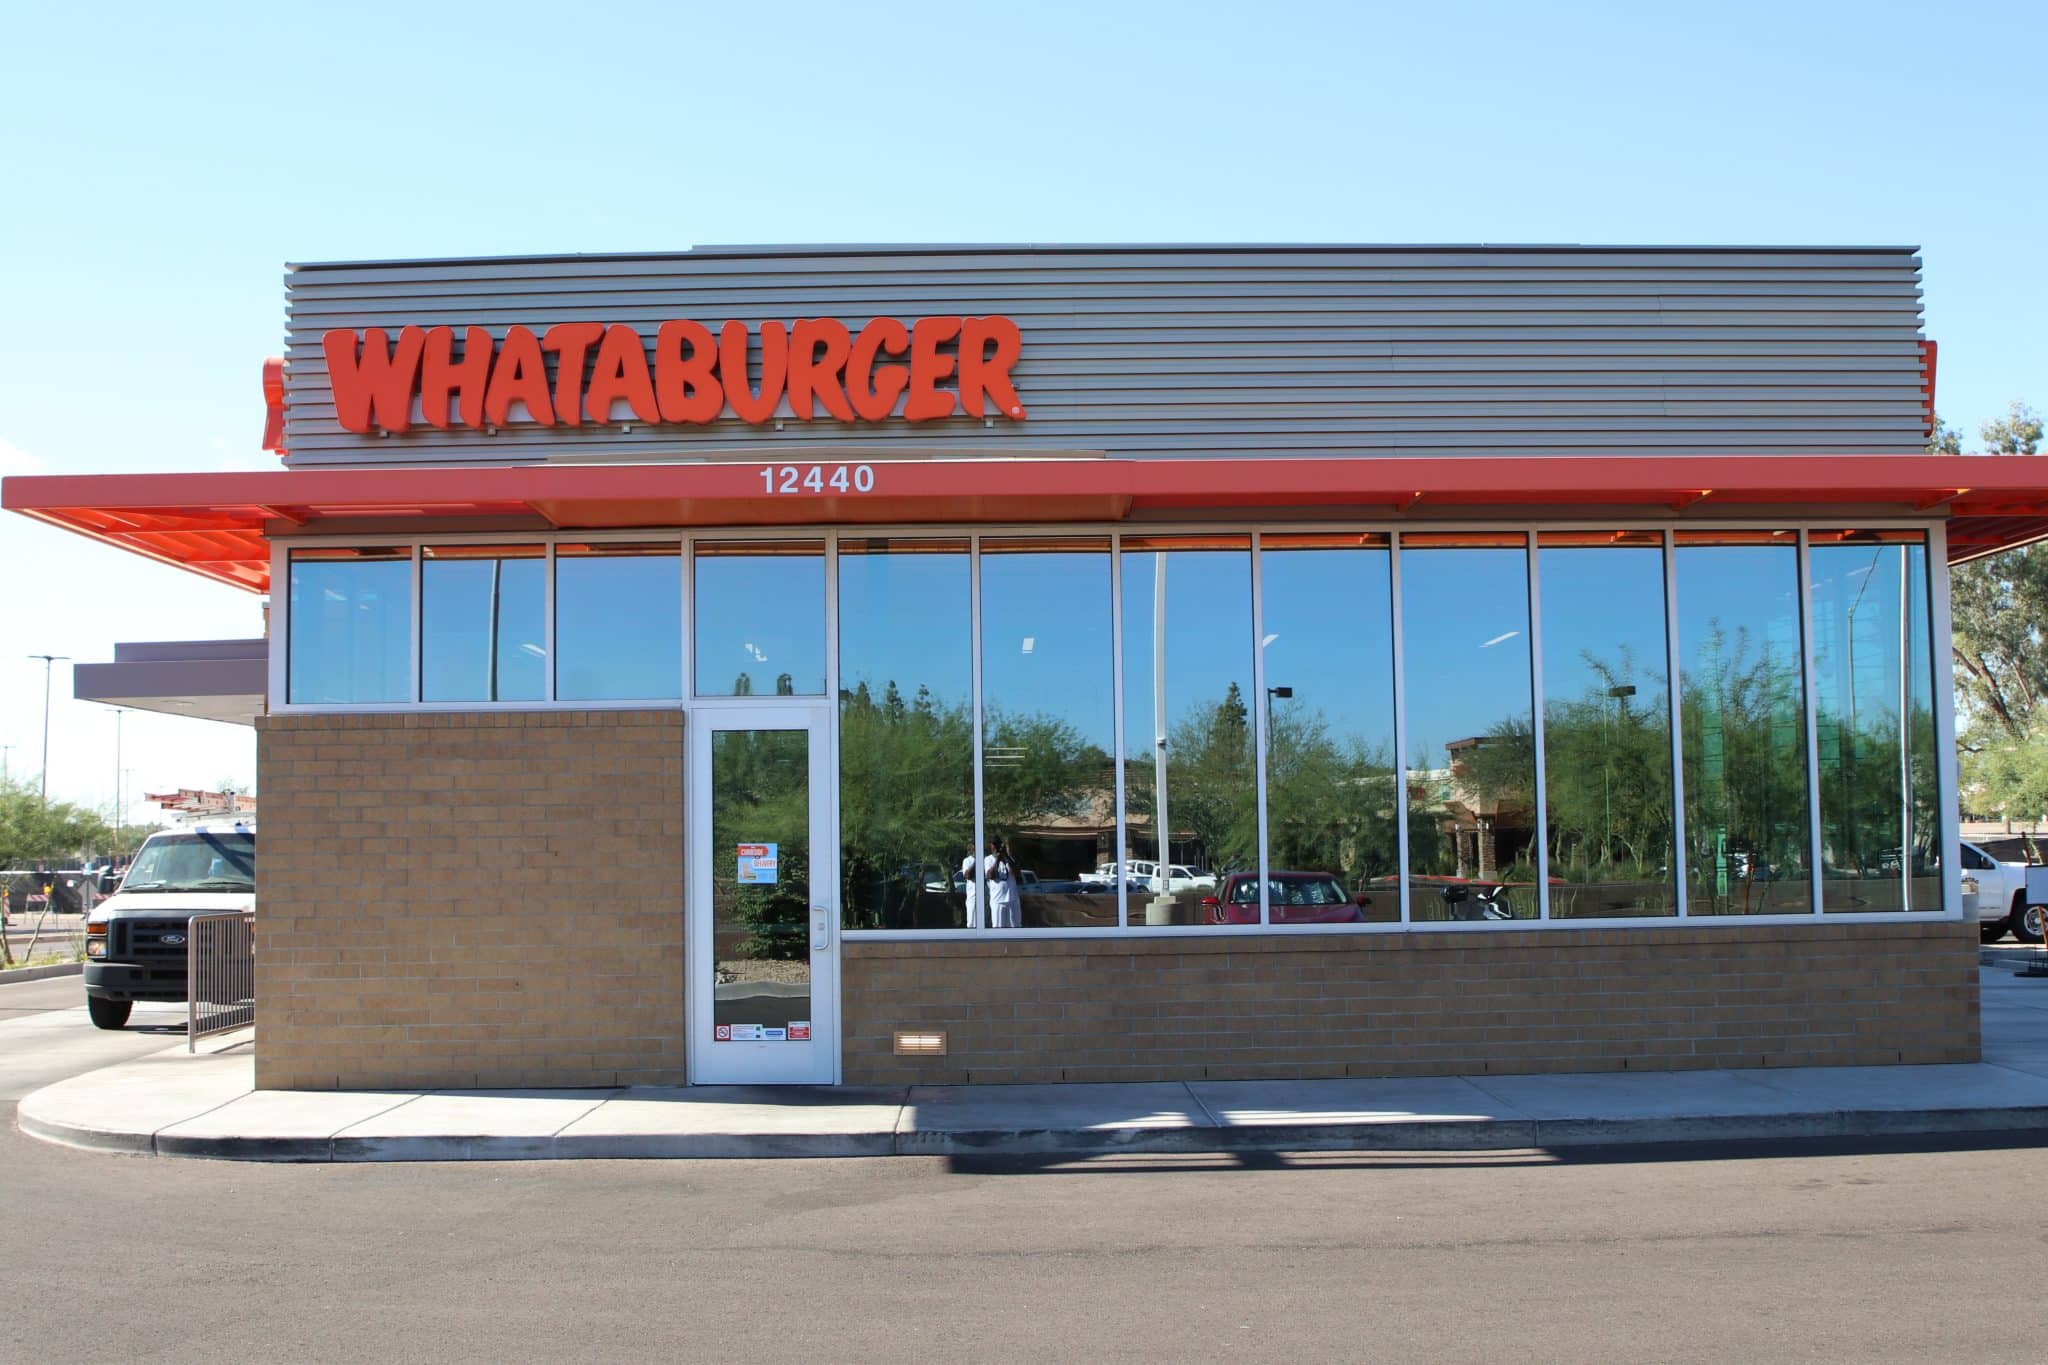 Whataburger opens in Woodstock Thursday. When is the burger chain coming to your area?